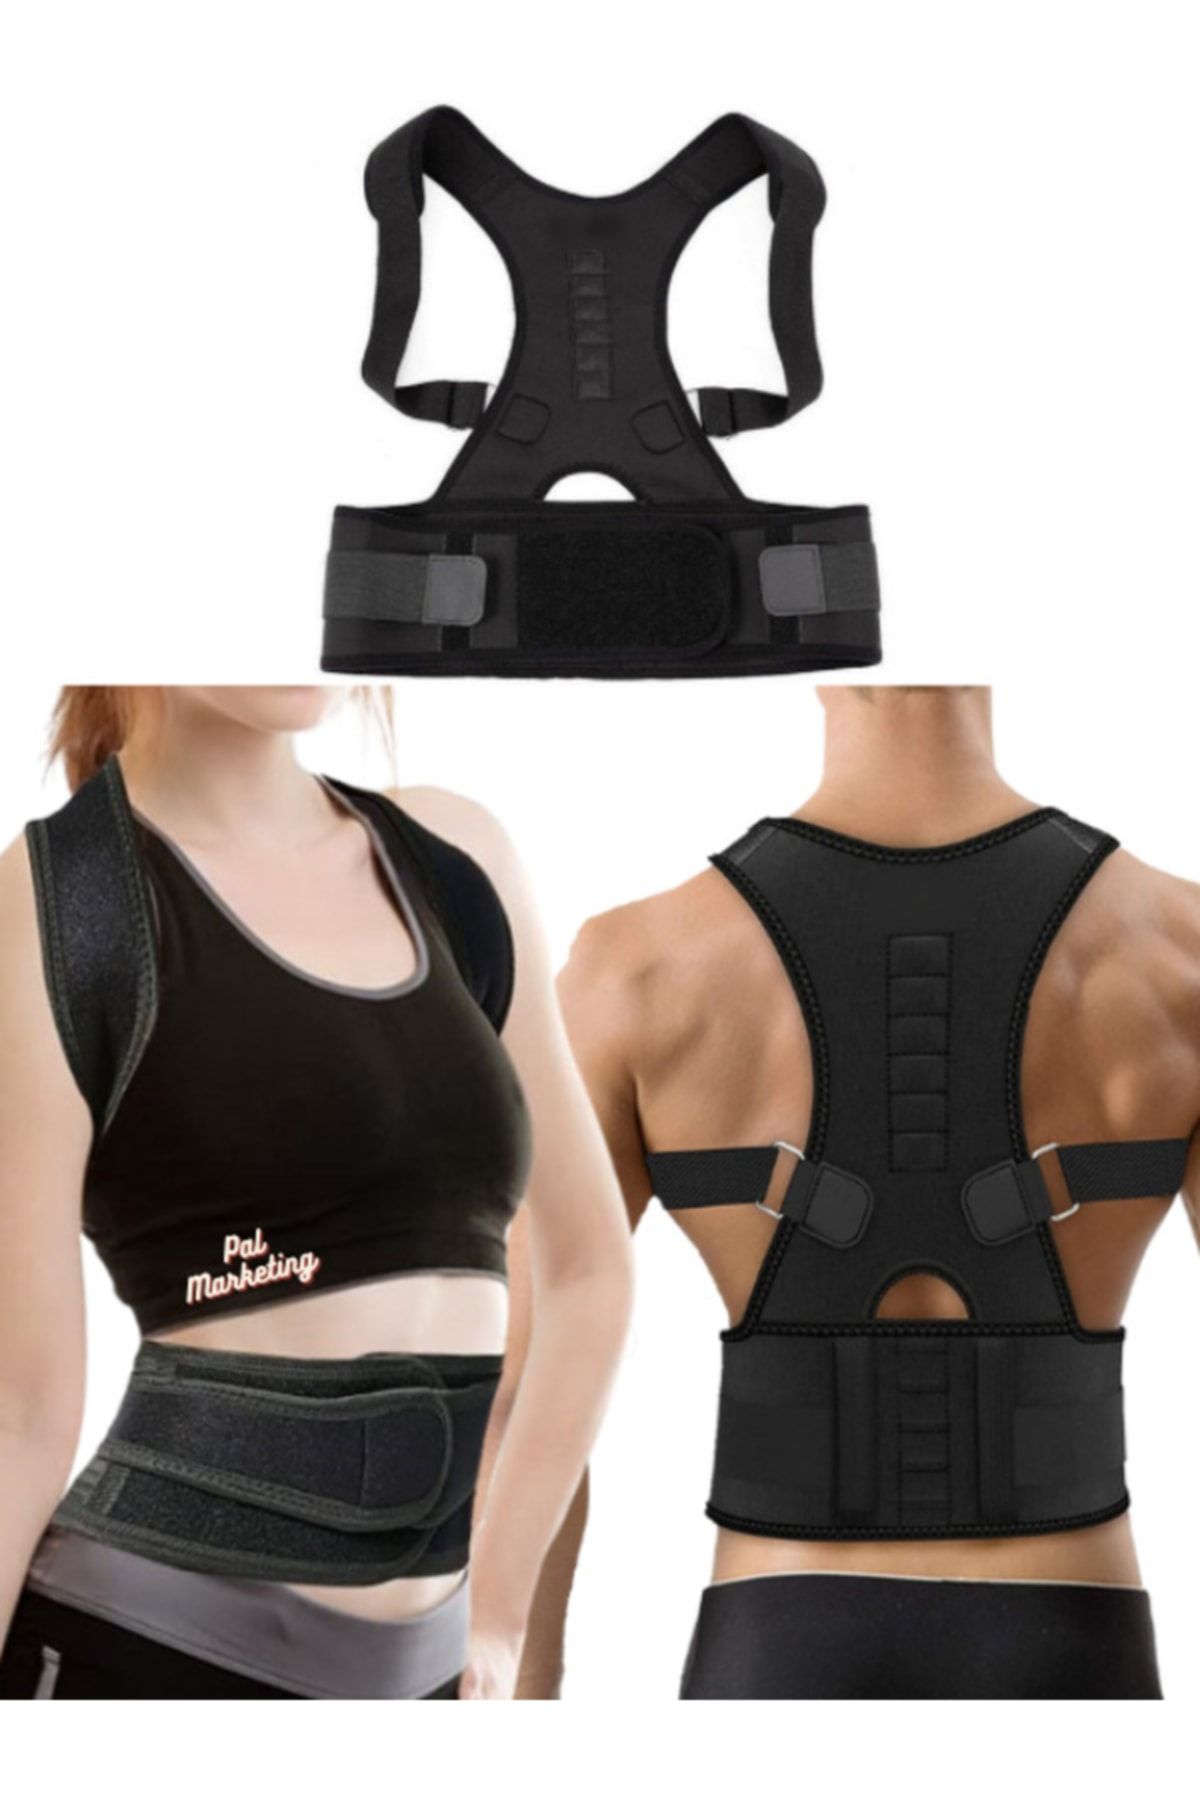 Ankaflex Back Brace Posture Corrector Spinal Support For Women And Men, Lumbar Posture Correction